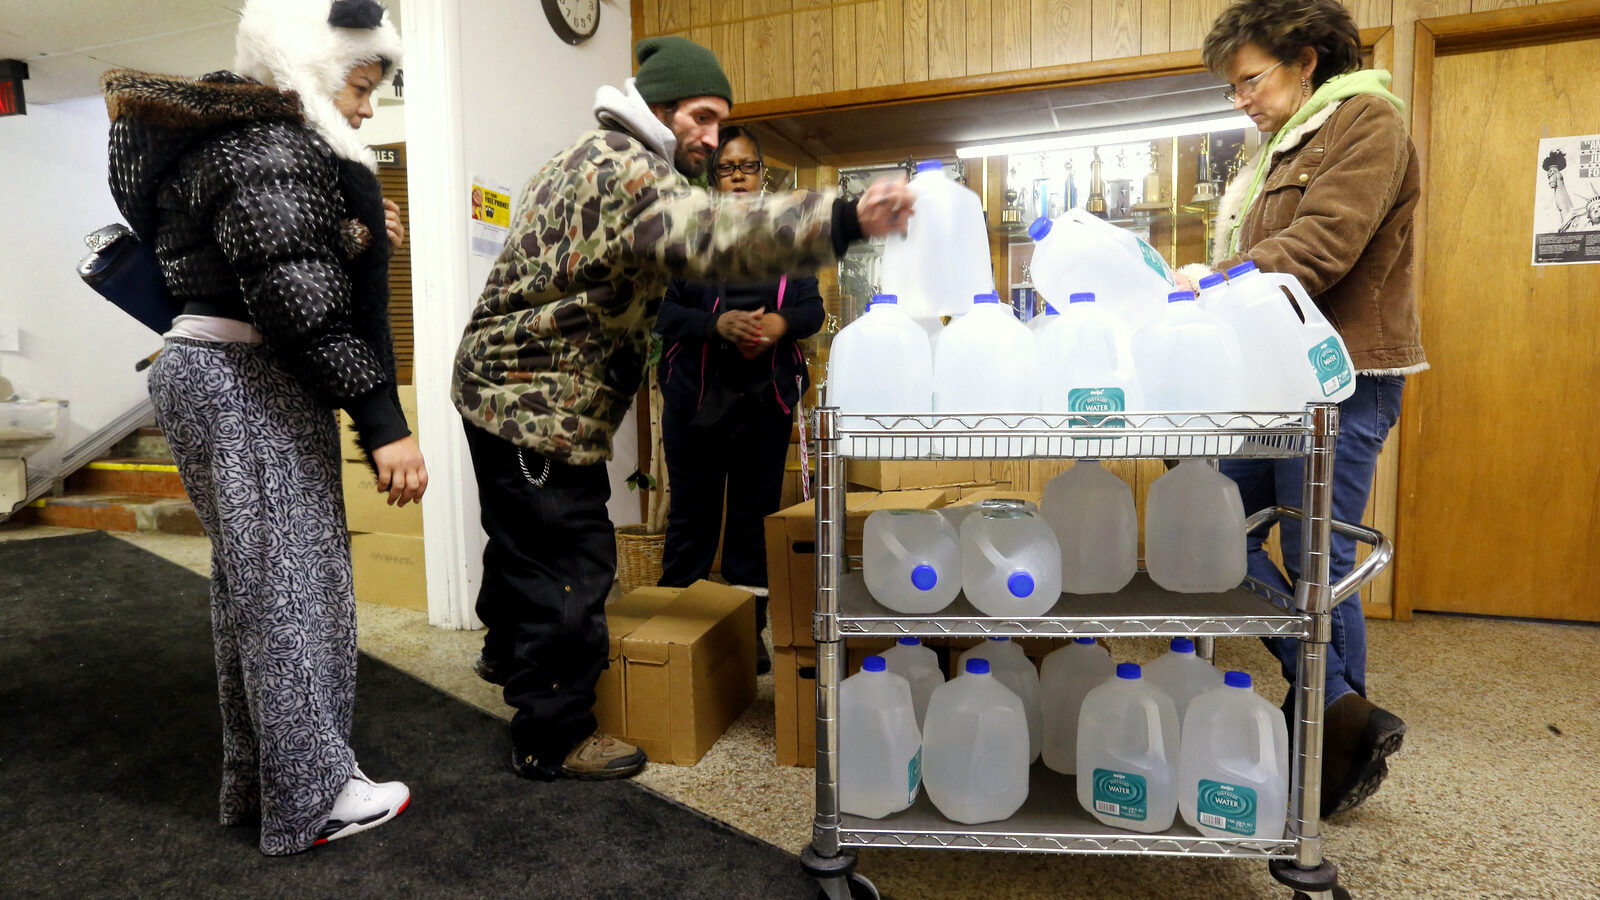 Flint residents receive free water being distributed at the Lincoln Park United Methodist Church in Flint, Mich. Feb. 3, 2015. (AP Photo/Paul Sancya)